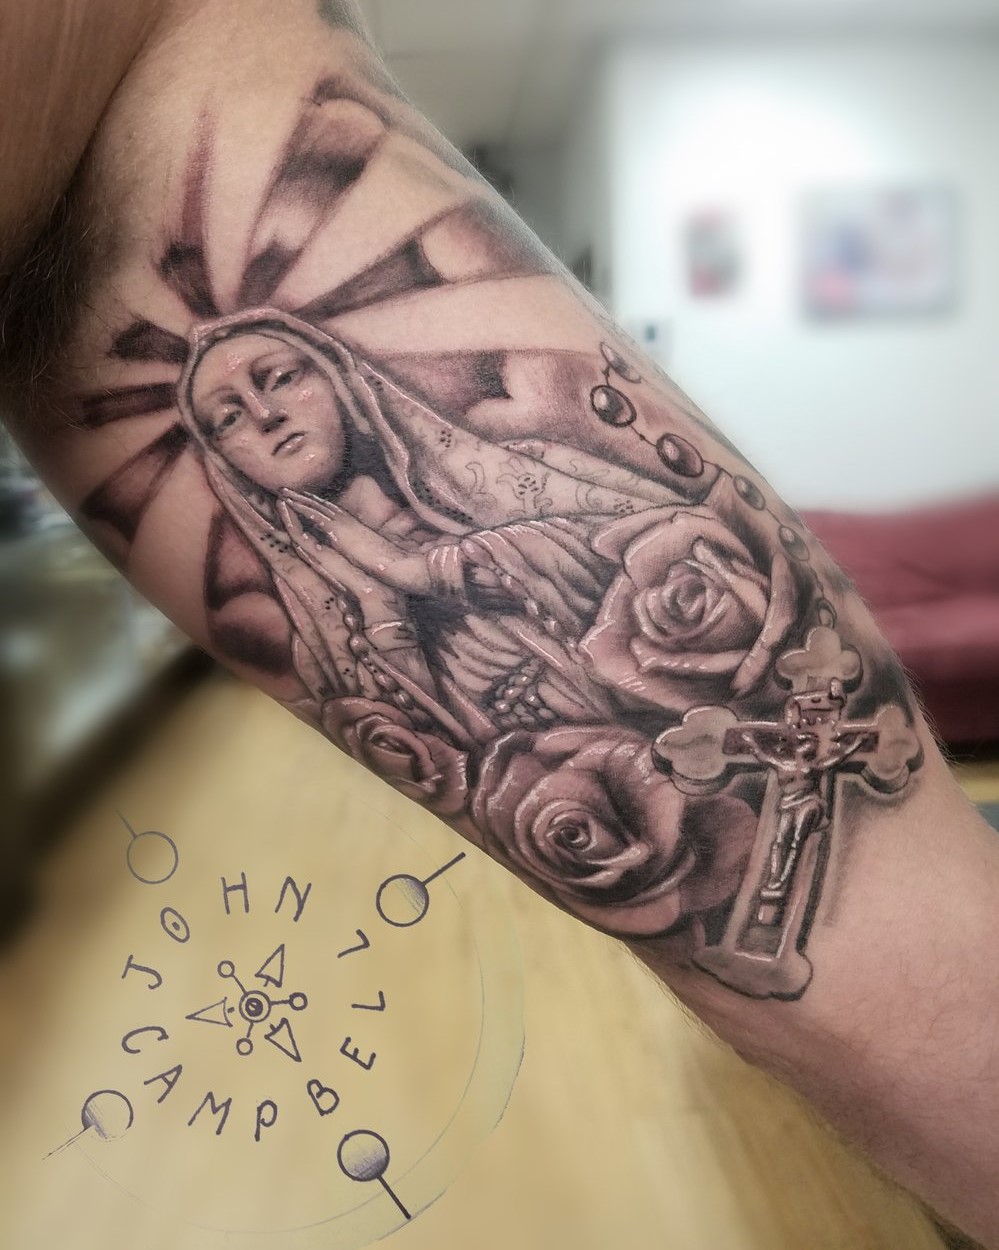 Black and Grey Mary with Roses - Rosary tattoo created by Tattoo Artist John Campbell at Sacred Mandala Studio in Durham, NC.